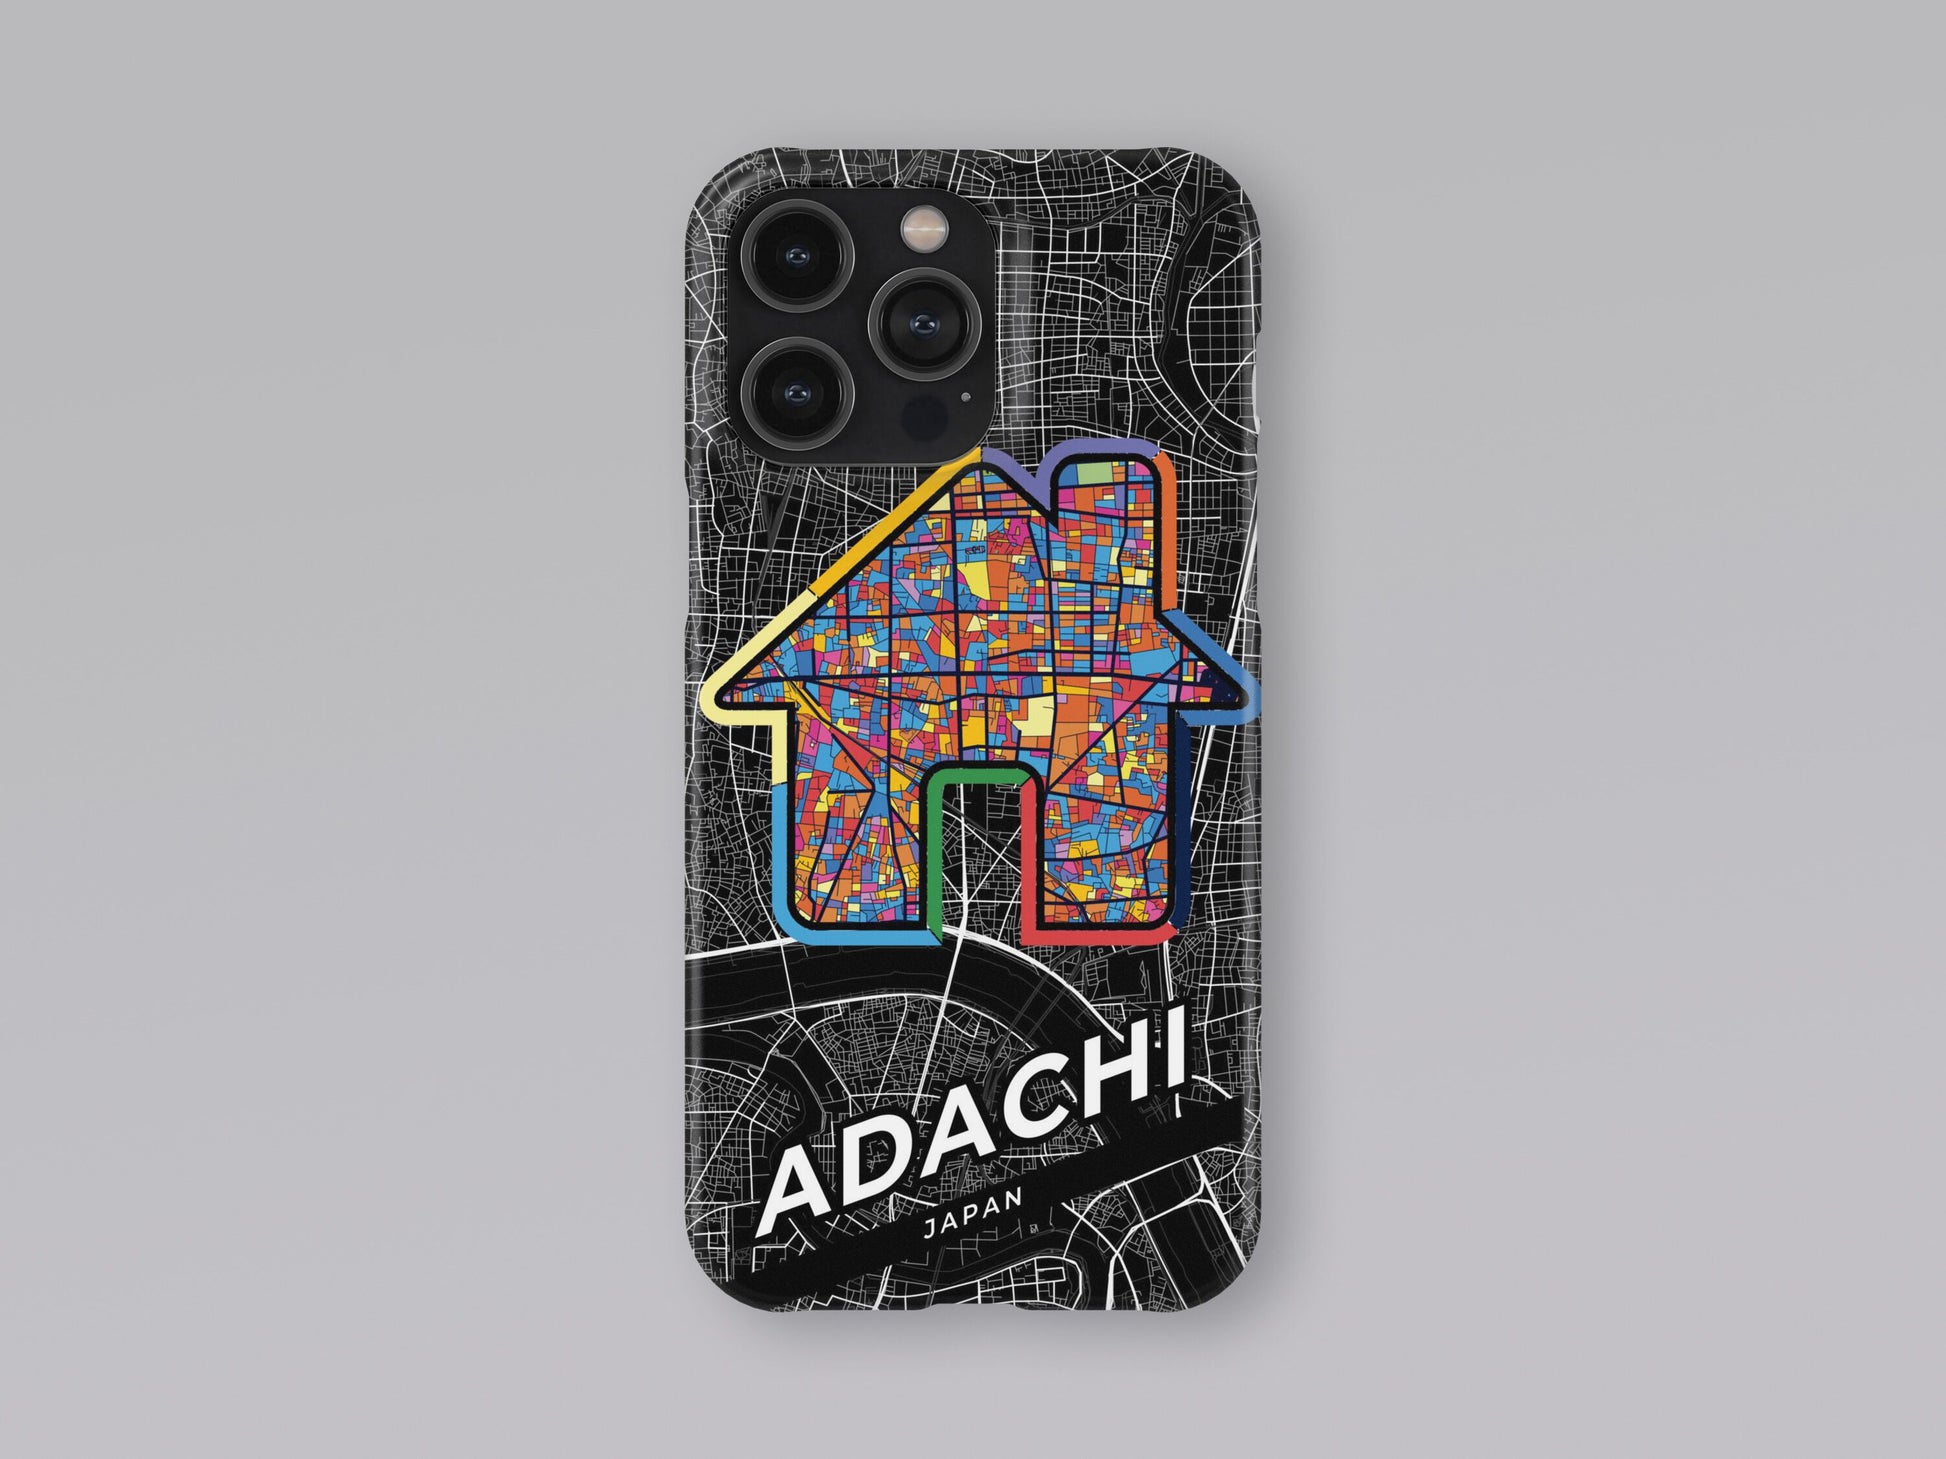 Adachi Japan slim phone case with colorful icon. Birthday, wedding or housewarming gift. Couple match cases. 3